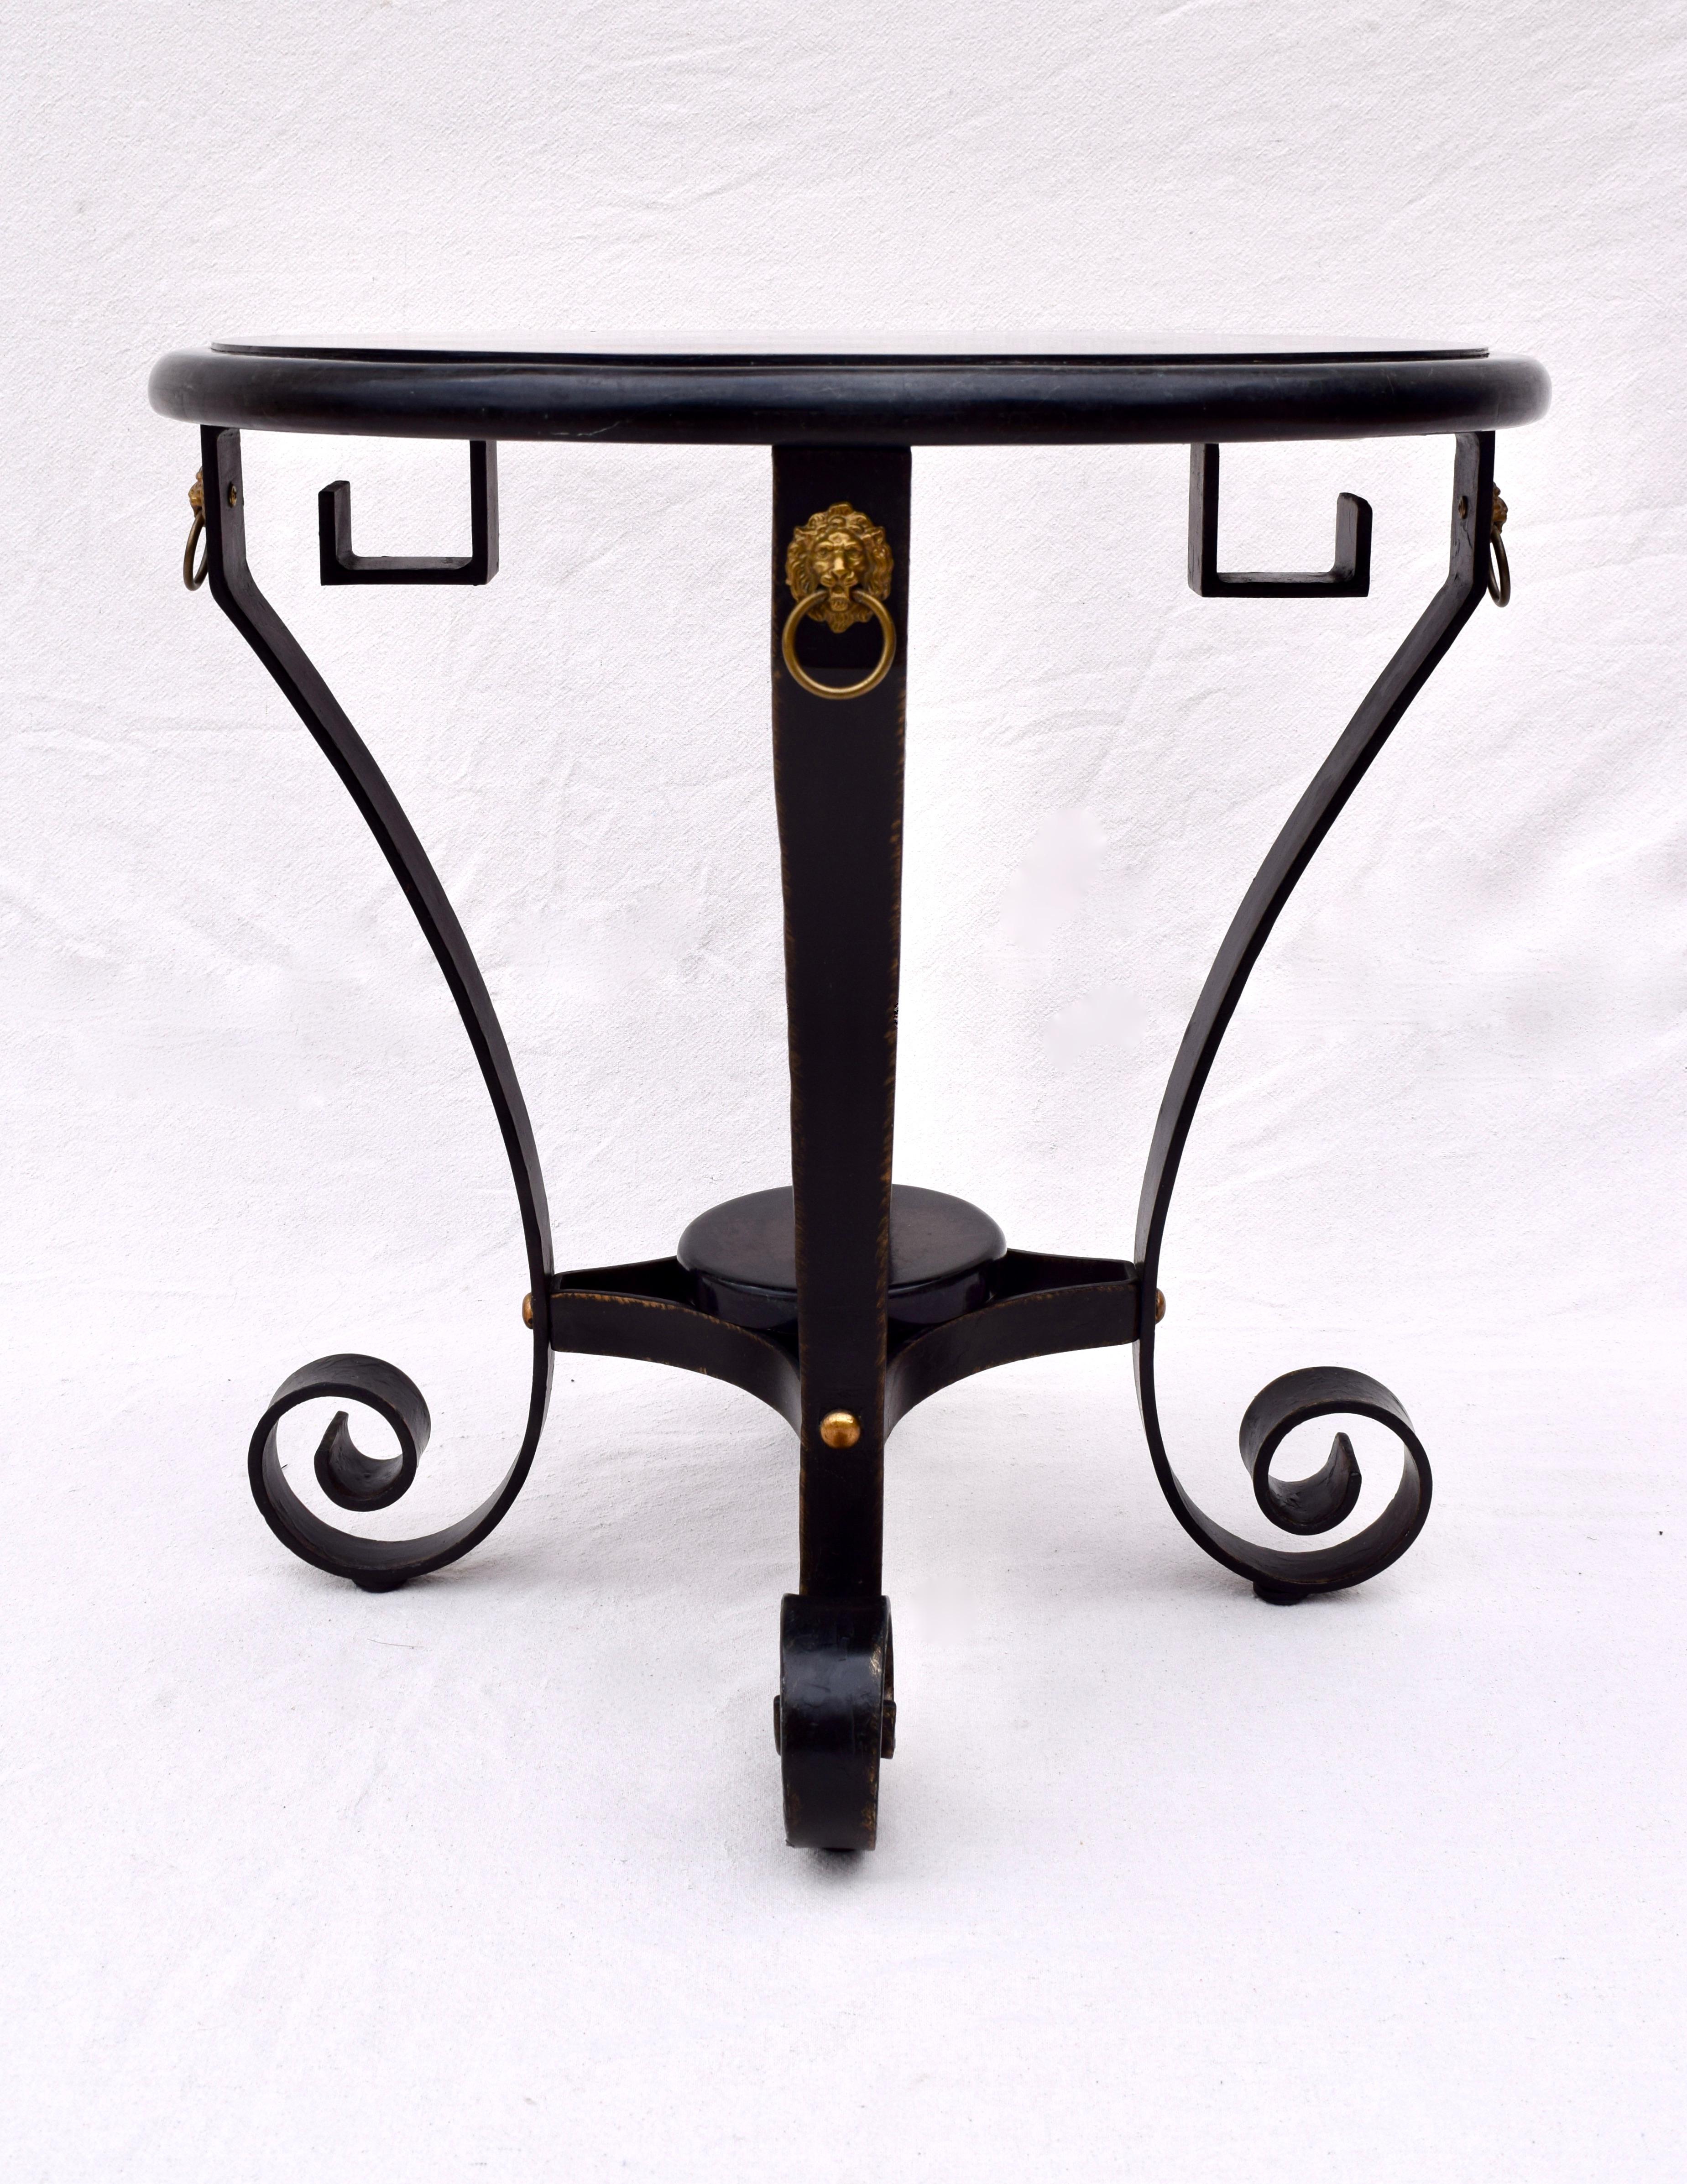 Tessellated black with tortoise stone & shell Neoclassical style table by Maitland Smith. Aesthetically striking in its' forged iron base with Greek Key design embellished with brass lion heads detailing. A multifunctional option useful in a various